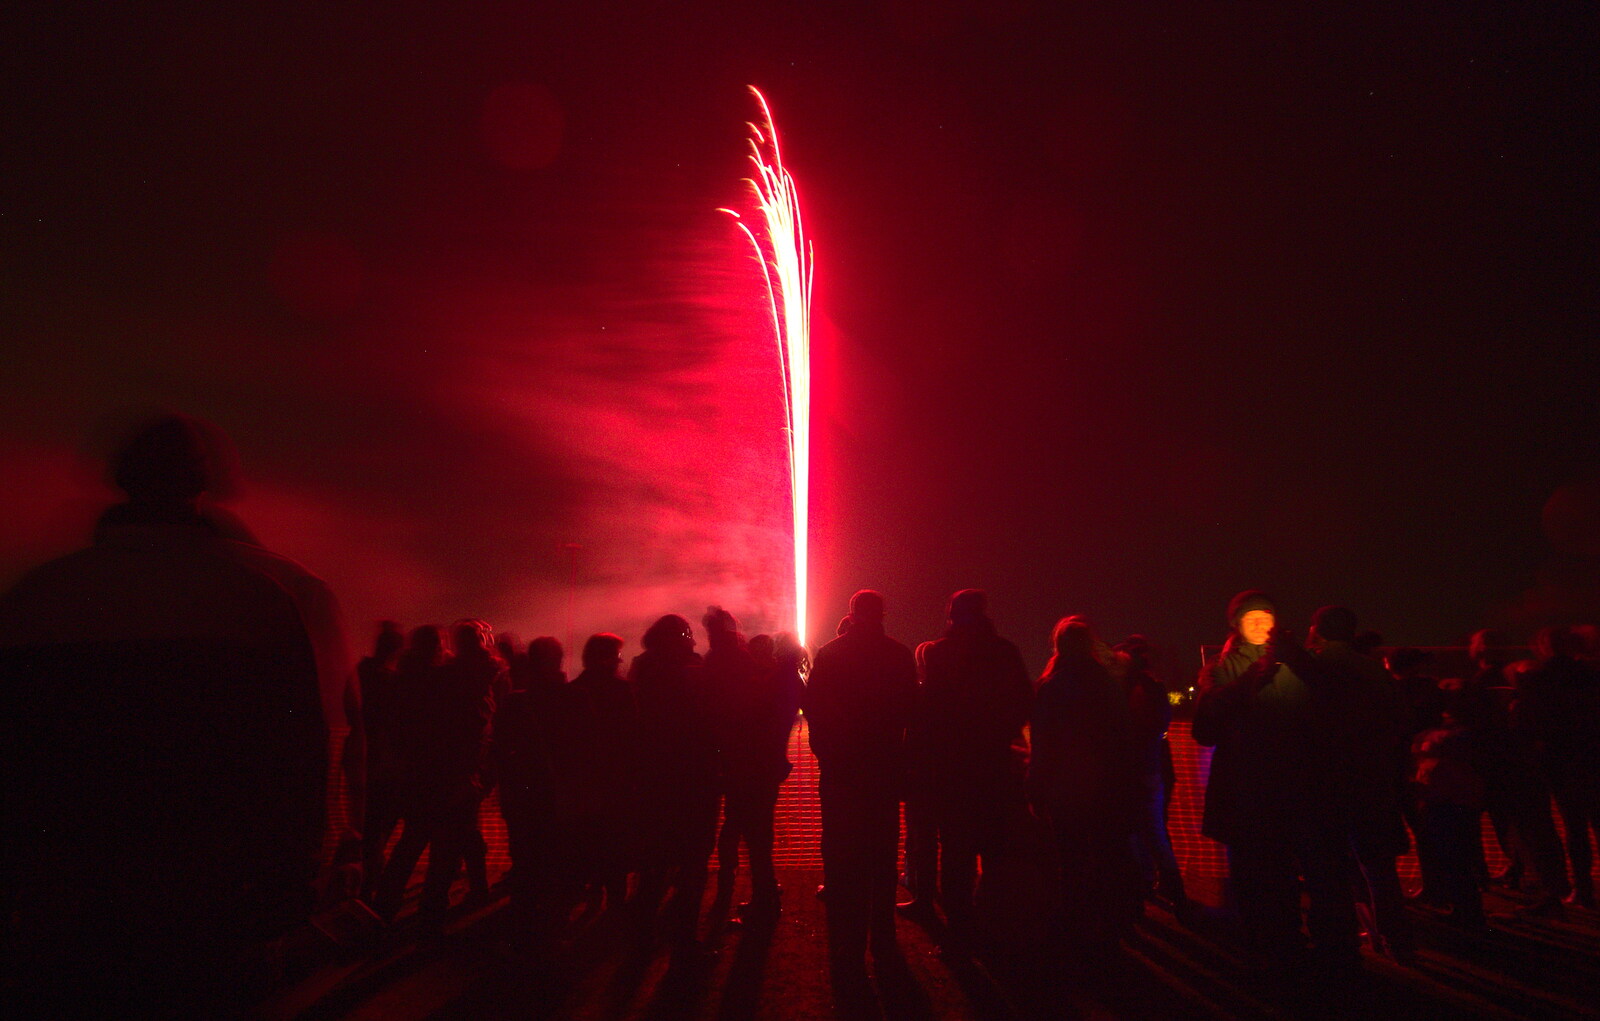 A roman candle in red from Apples and Fireworks, Carleton Rode and Palgrave, Suffolk - 4th November 2018